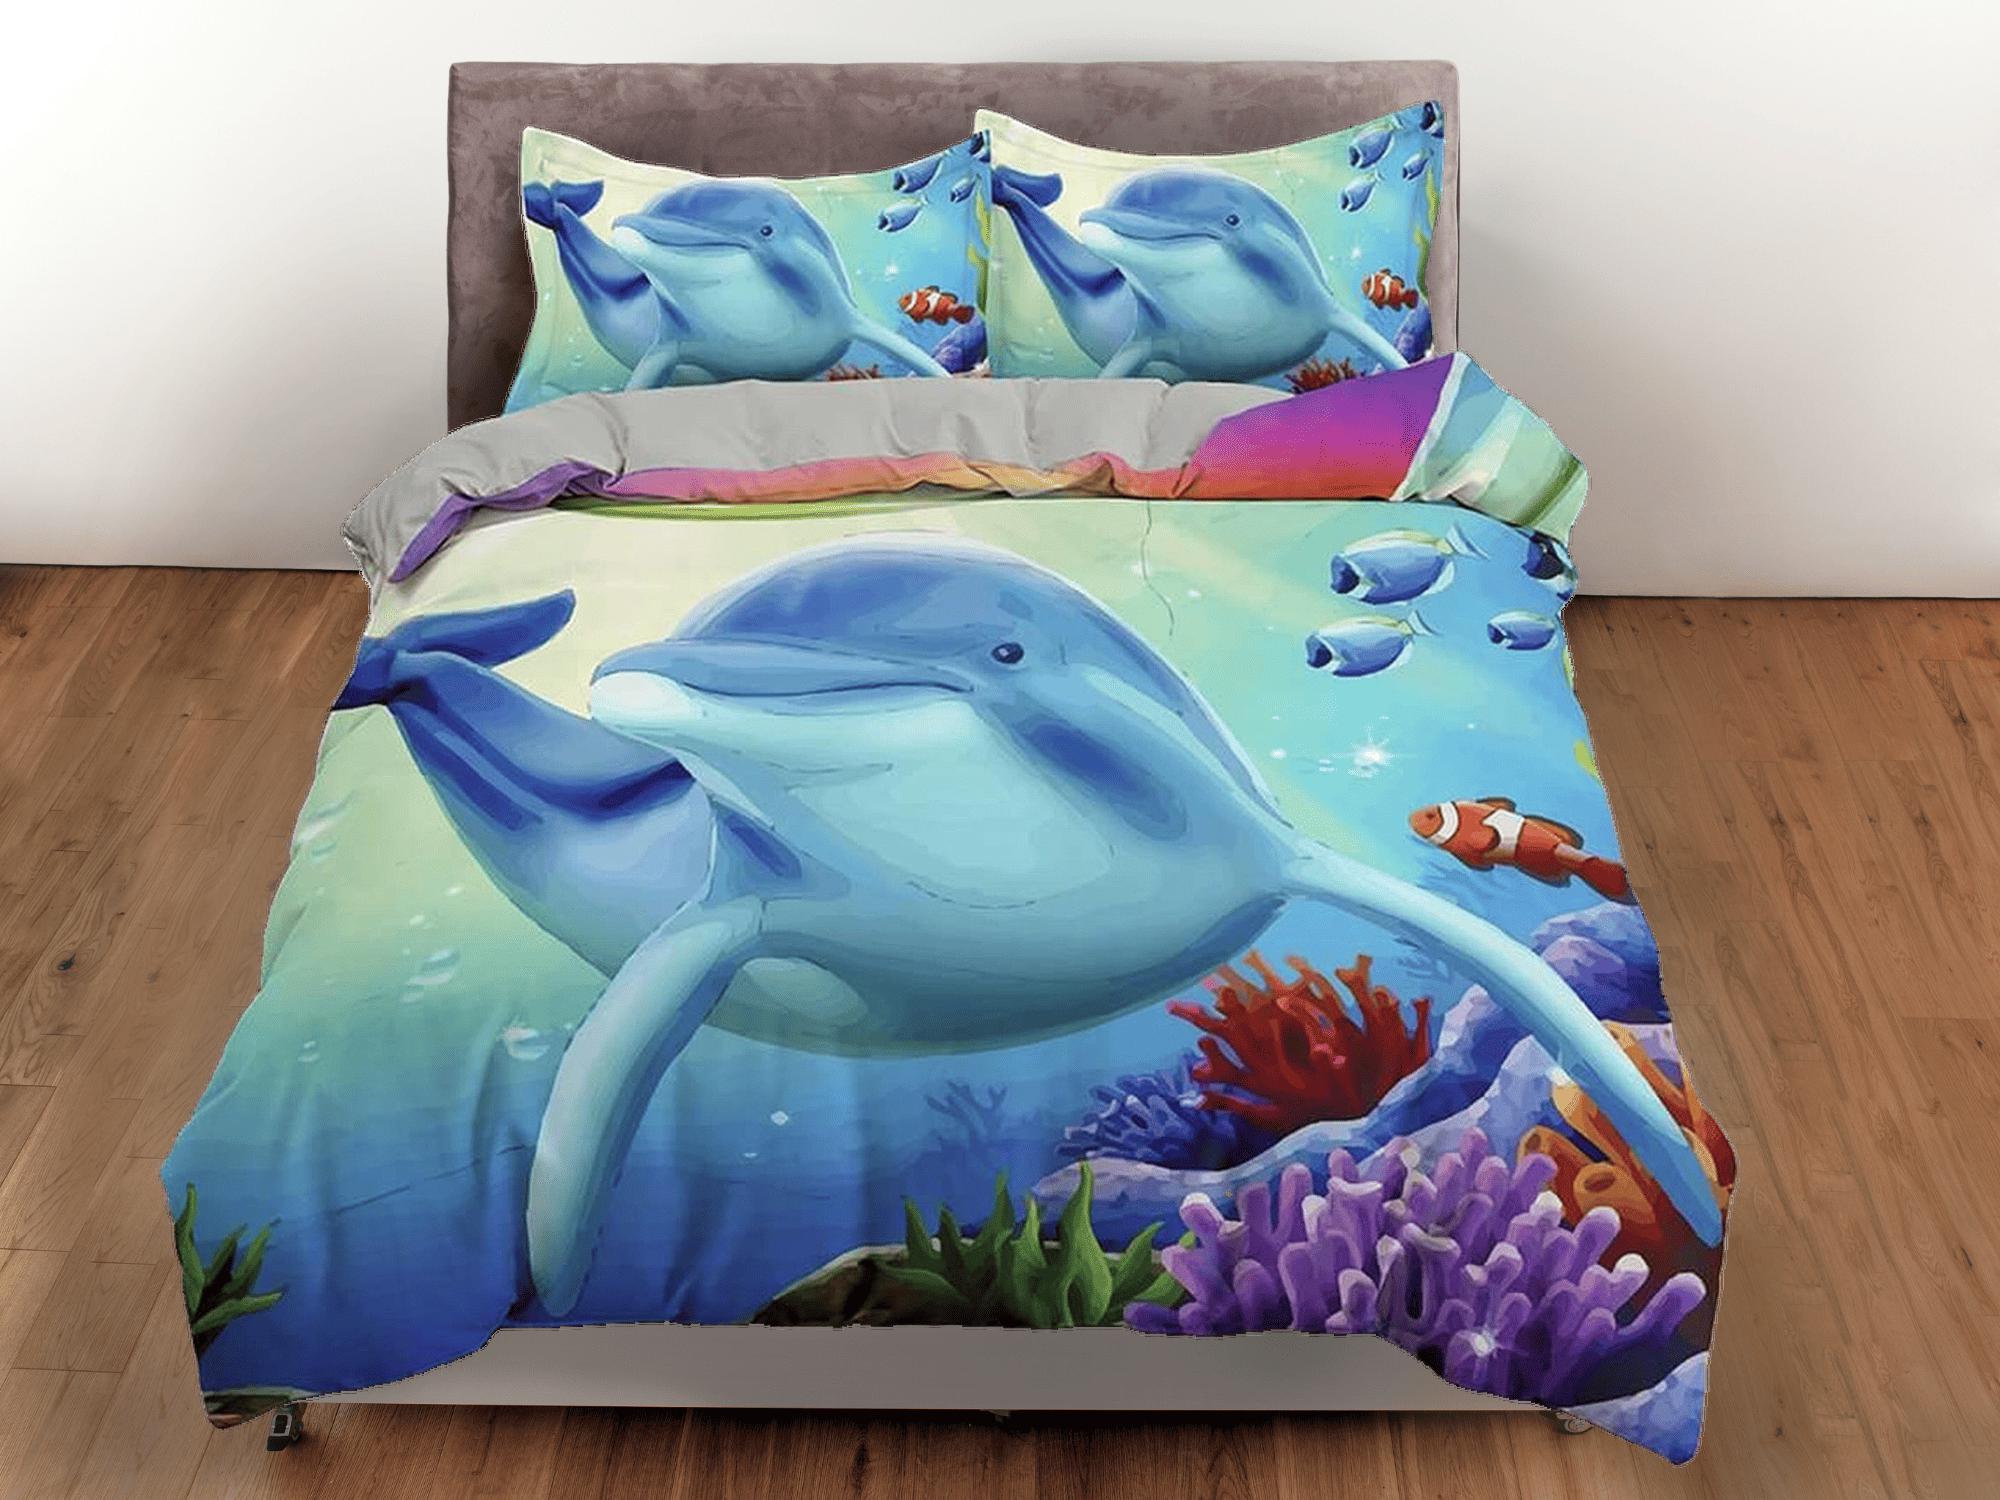 daintyduvet Colorful corals and dolphin bedding duvet cover, ocean blush decor bottle nose dolphin bedding set full king queen twin, dorm bedding gift